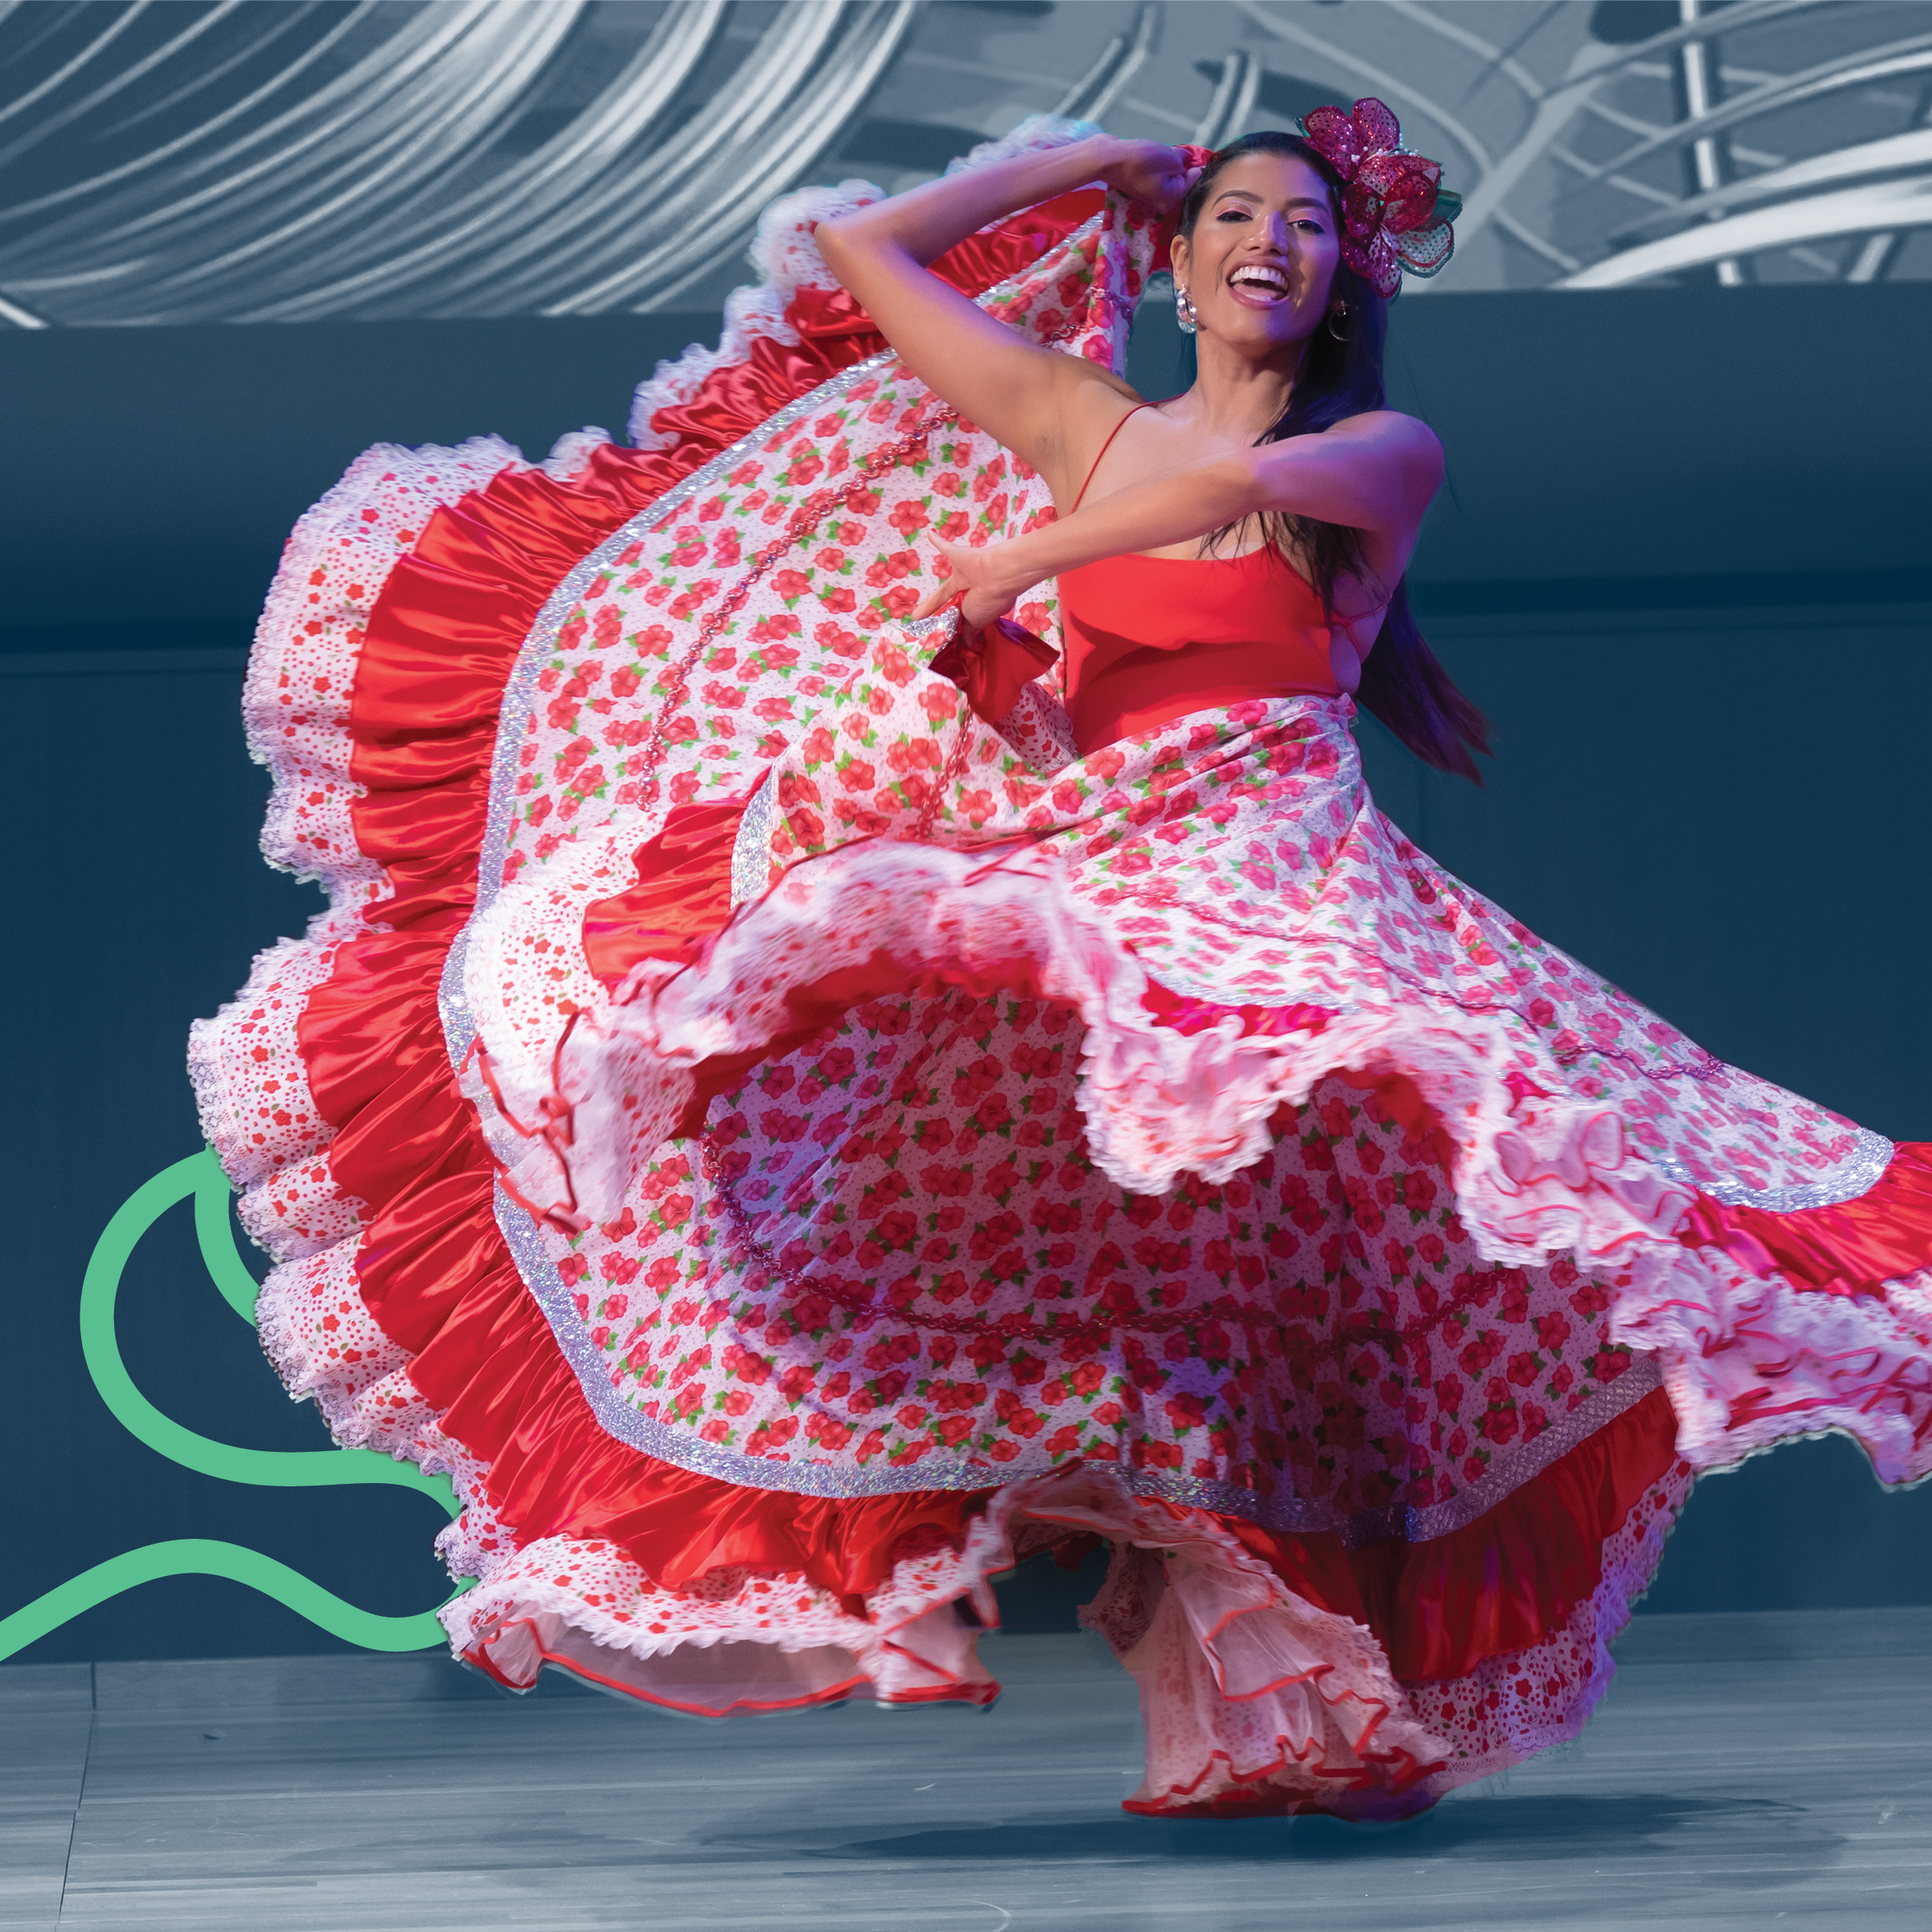 A woman in a bright red dress dances and spins